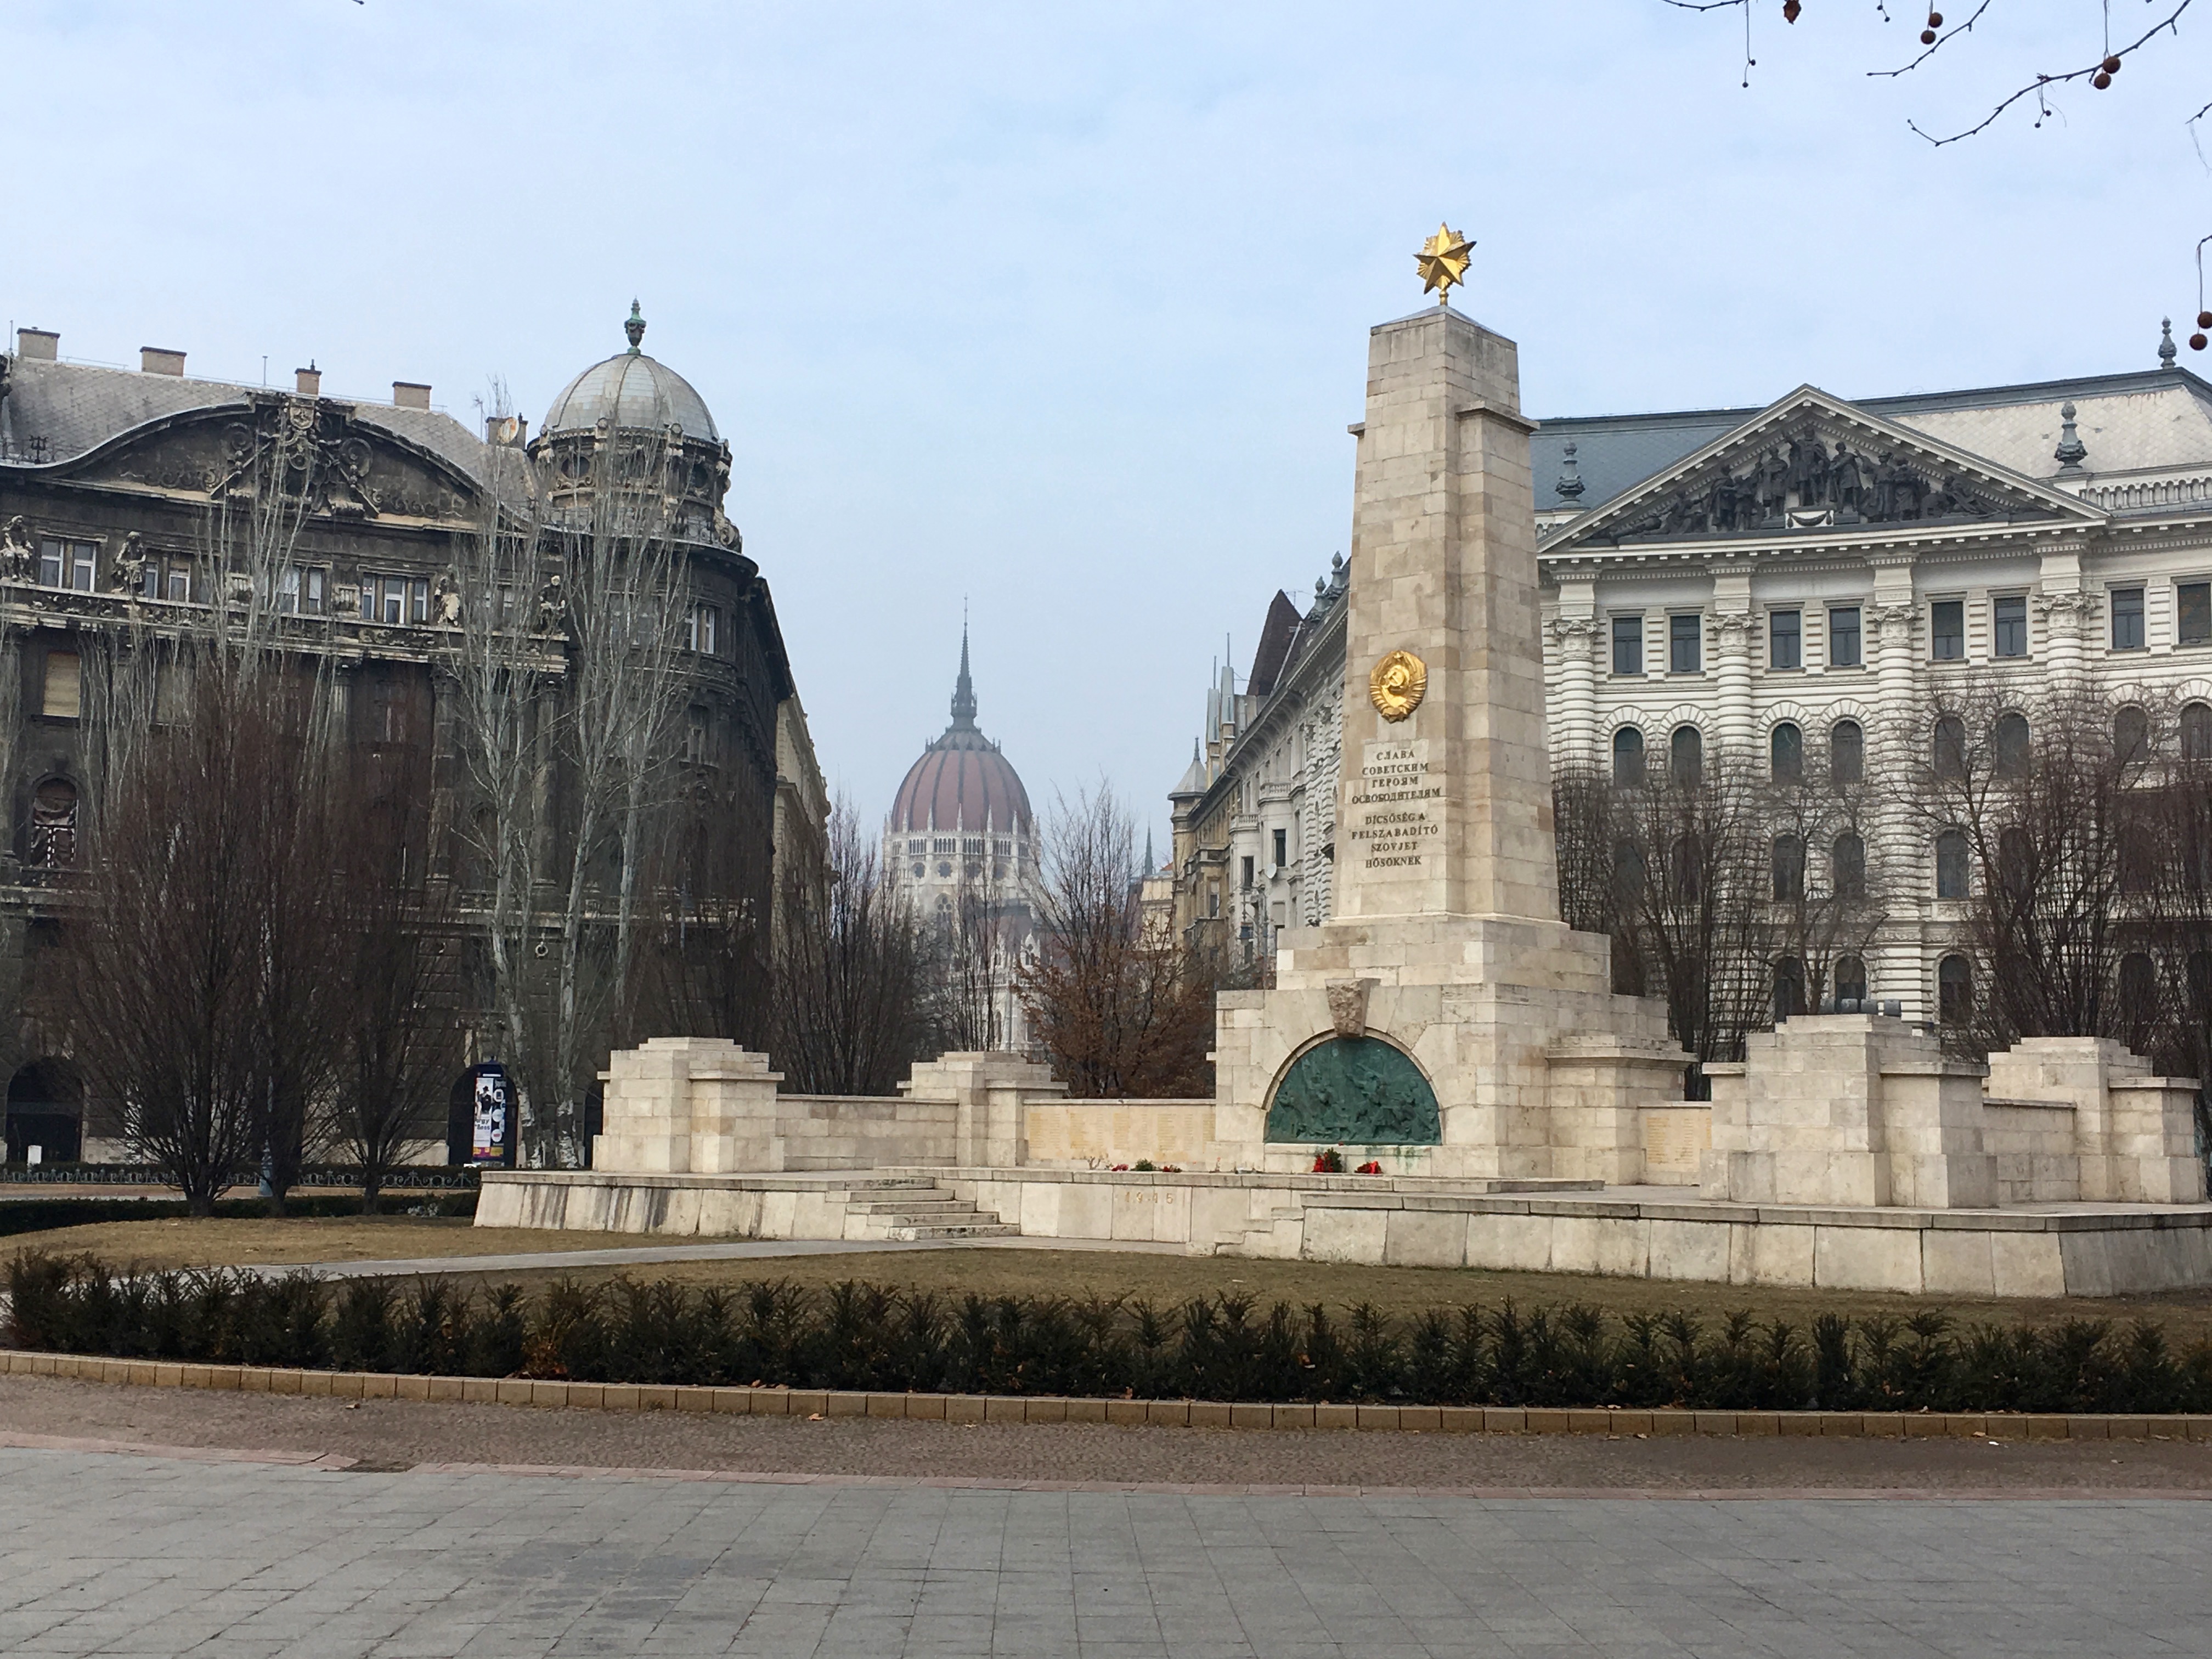 Szabadság tér | Budapest, Hungary Attractions - Lonely Planet